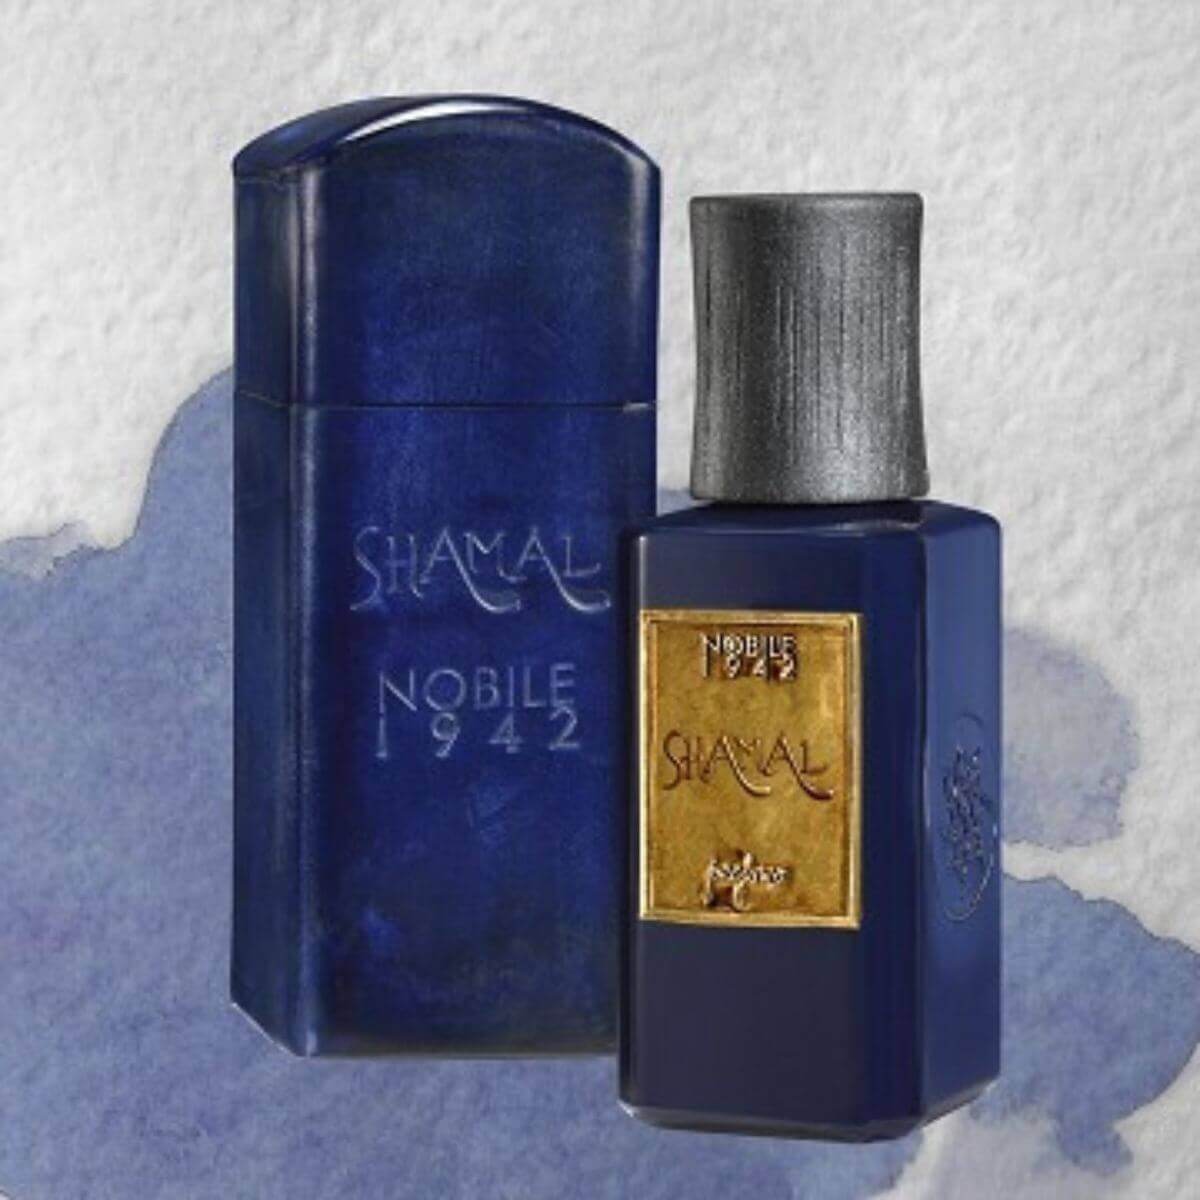 Nobile 1942 – Shamal, A Night Where The Desert Wind Blows And Takes Away All Your WorriesA Unique And Light Fragrance For Both Women And Mena Perfume With A Perfect Oriental Theme And A Dominant Smell Of Frankincense.The Breathtaking Notes Of Dates And Burning Incense Create A Soft Feeling On Your Skin.Shamal, An Irresistible, Warm, Captivating Scent That Revives Your SpiritTop Notes: Aromatic Notes, Apple, FrankincenseHeart Notes: Velvet, AmberBase Notes: Musk, Woody Notes